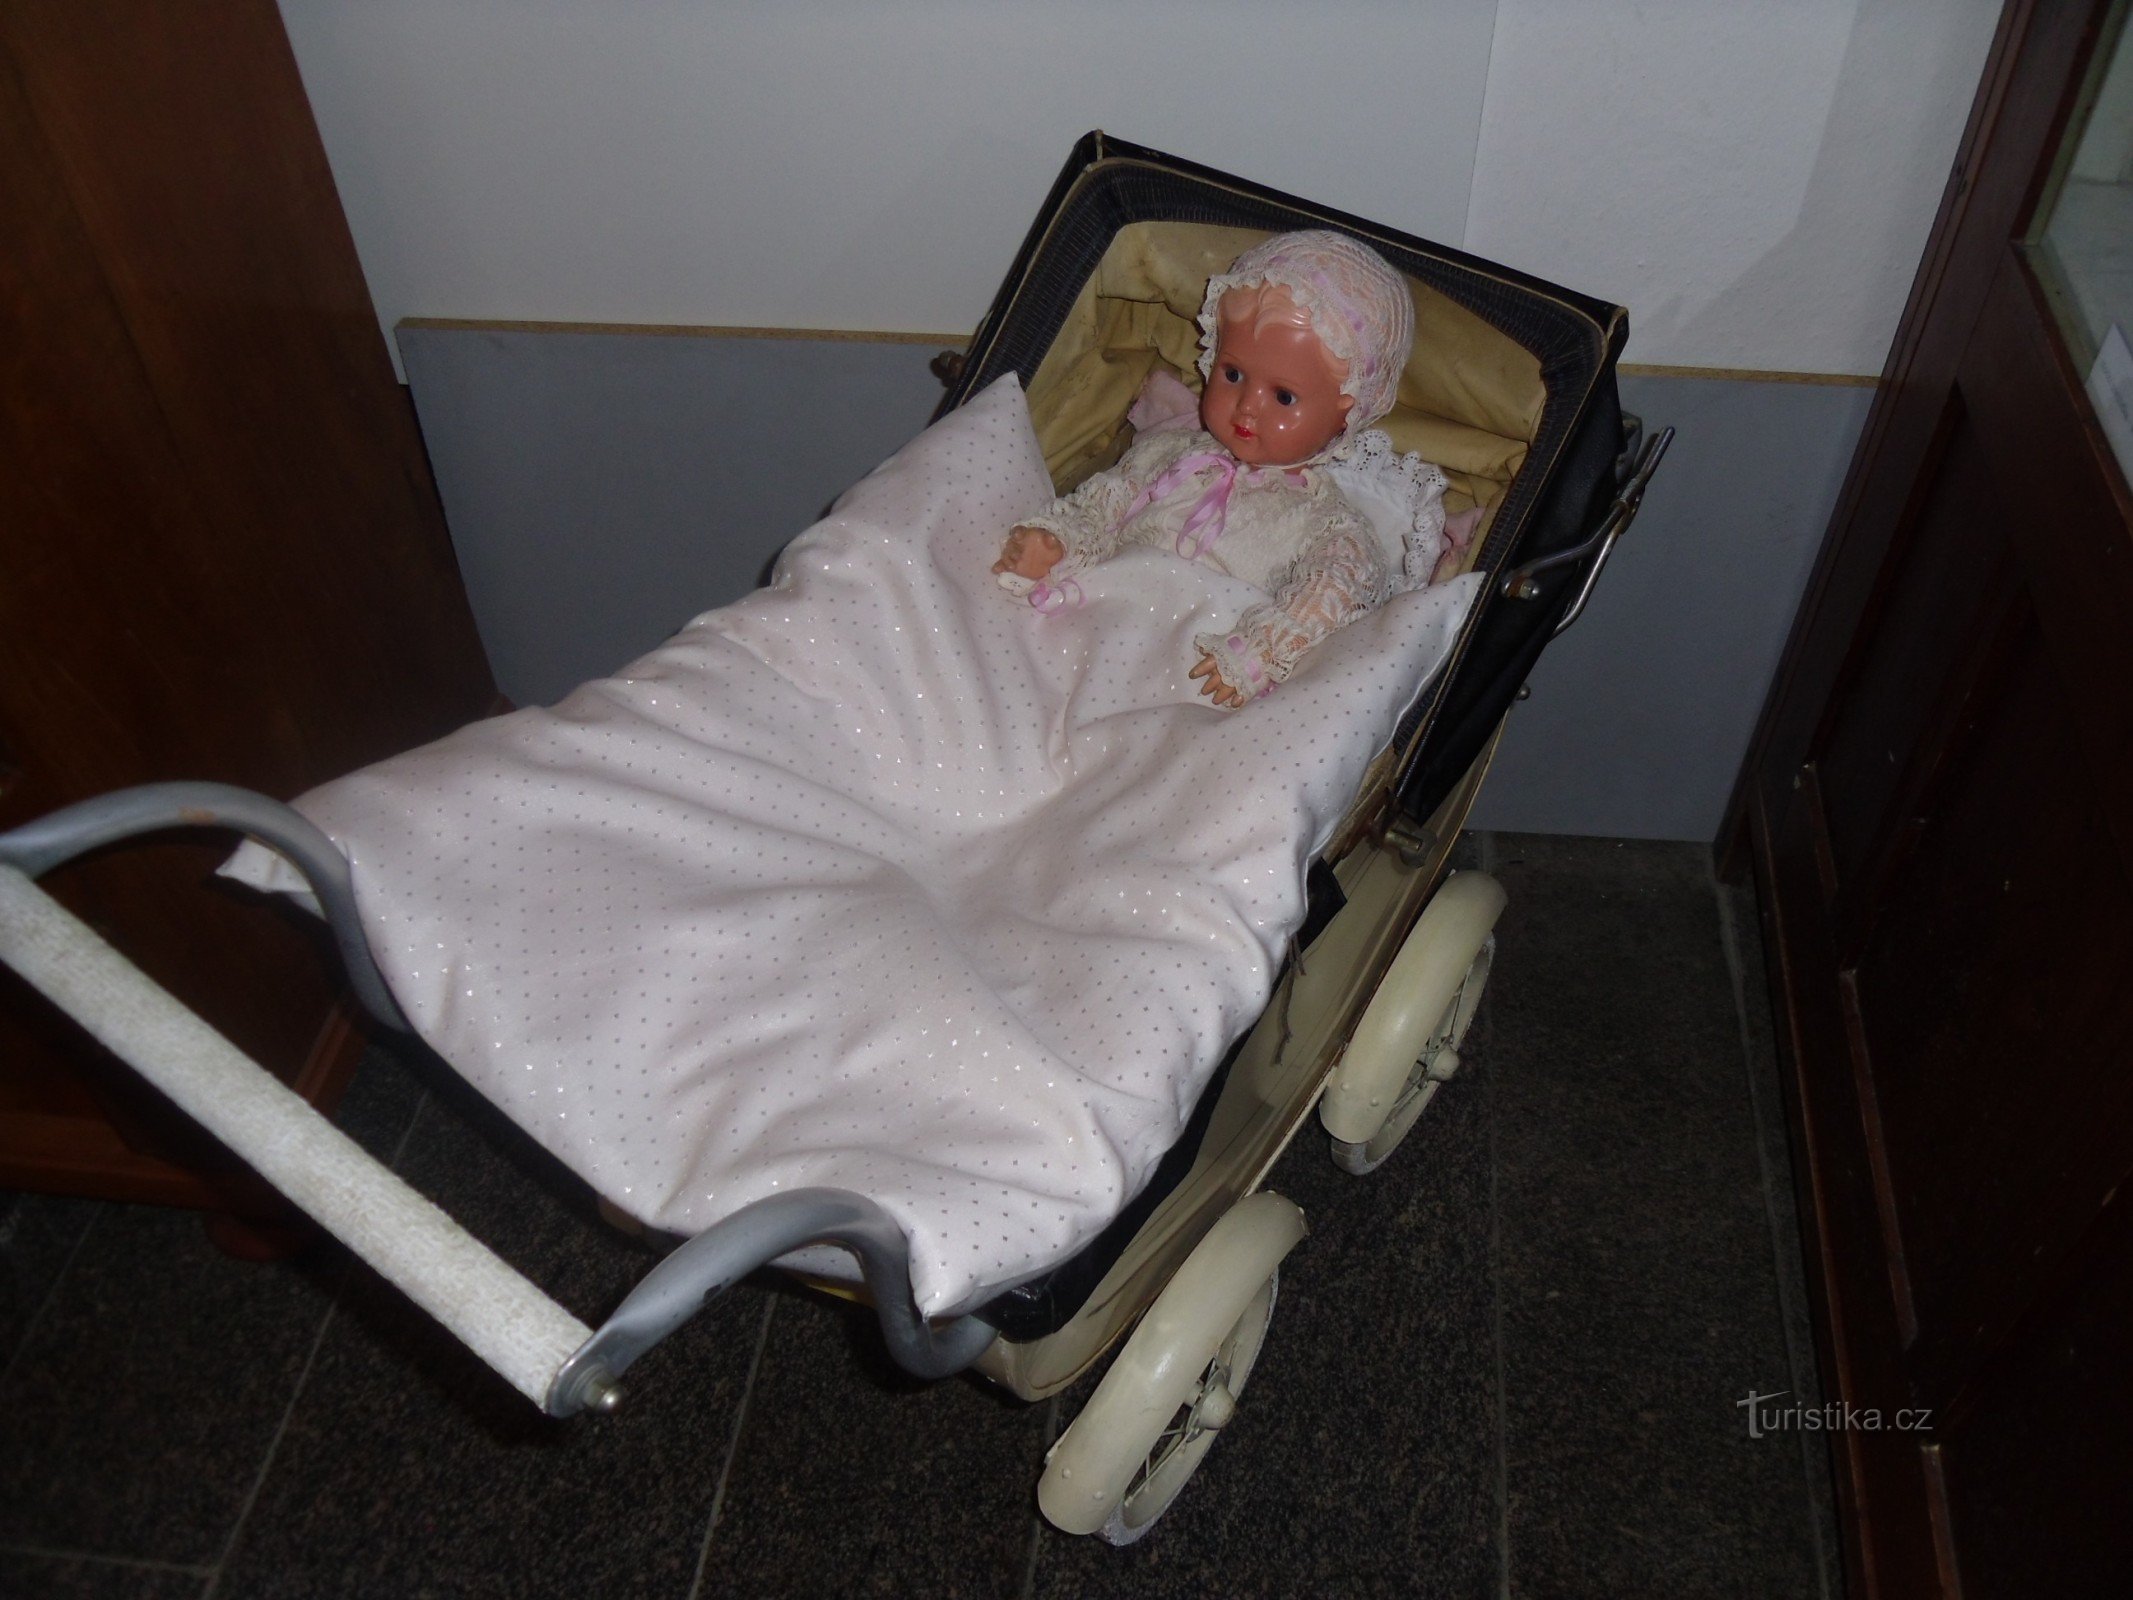 Litomyšl - Museum of houses, dolls and toys